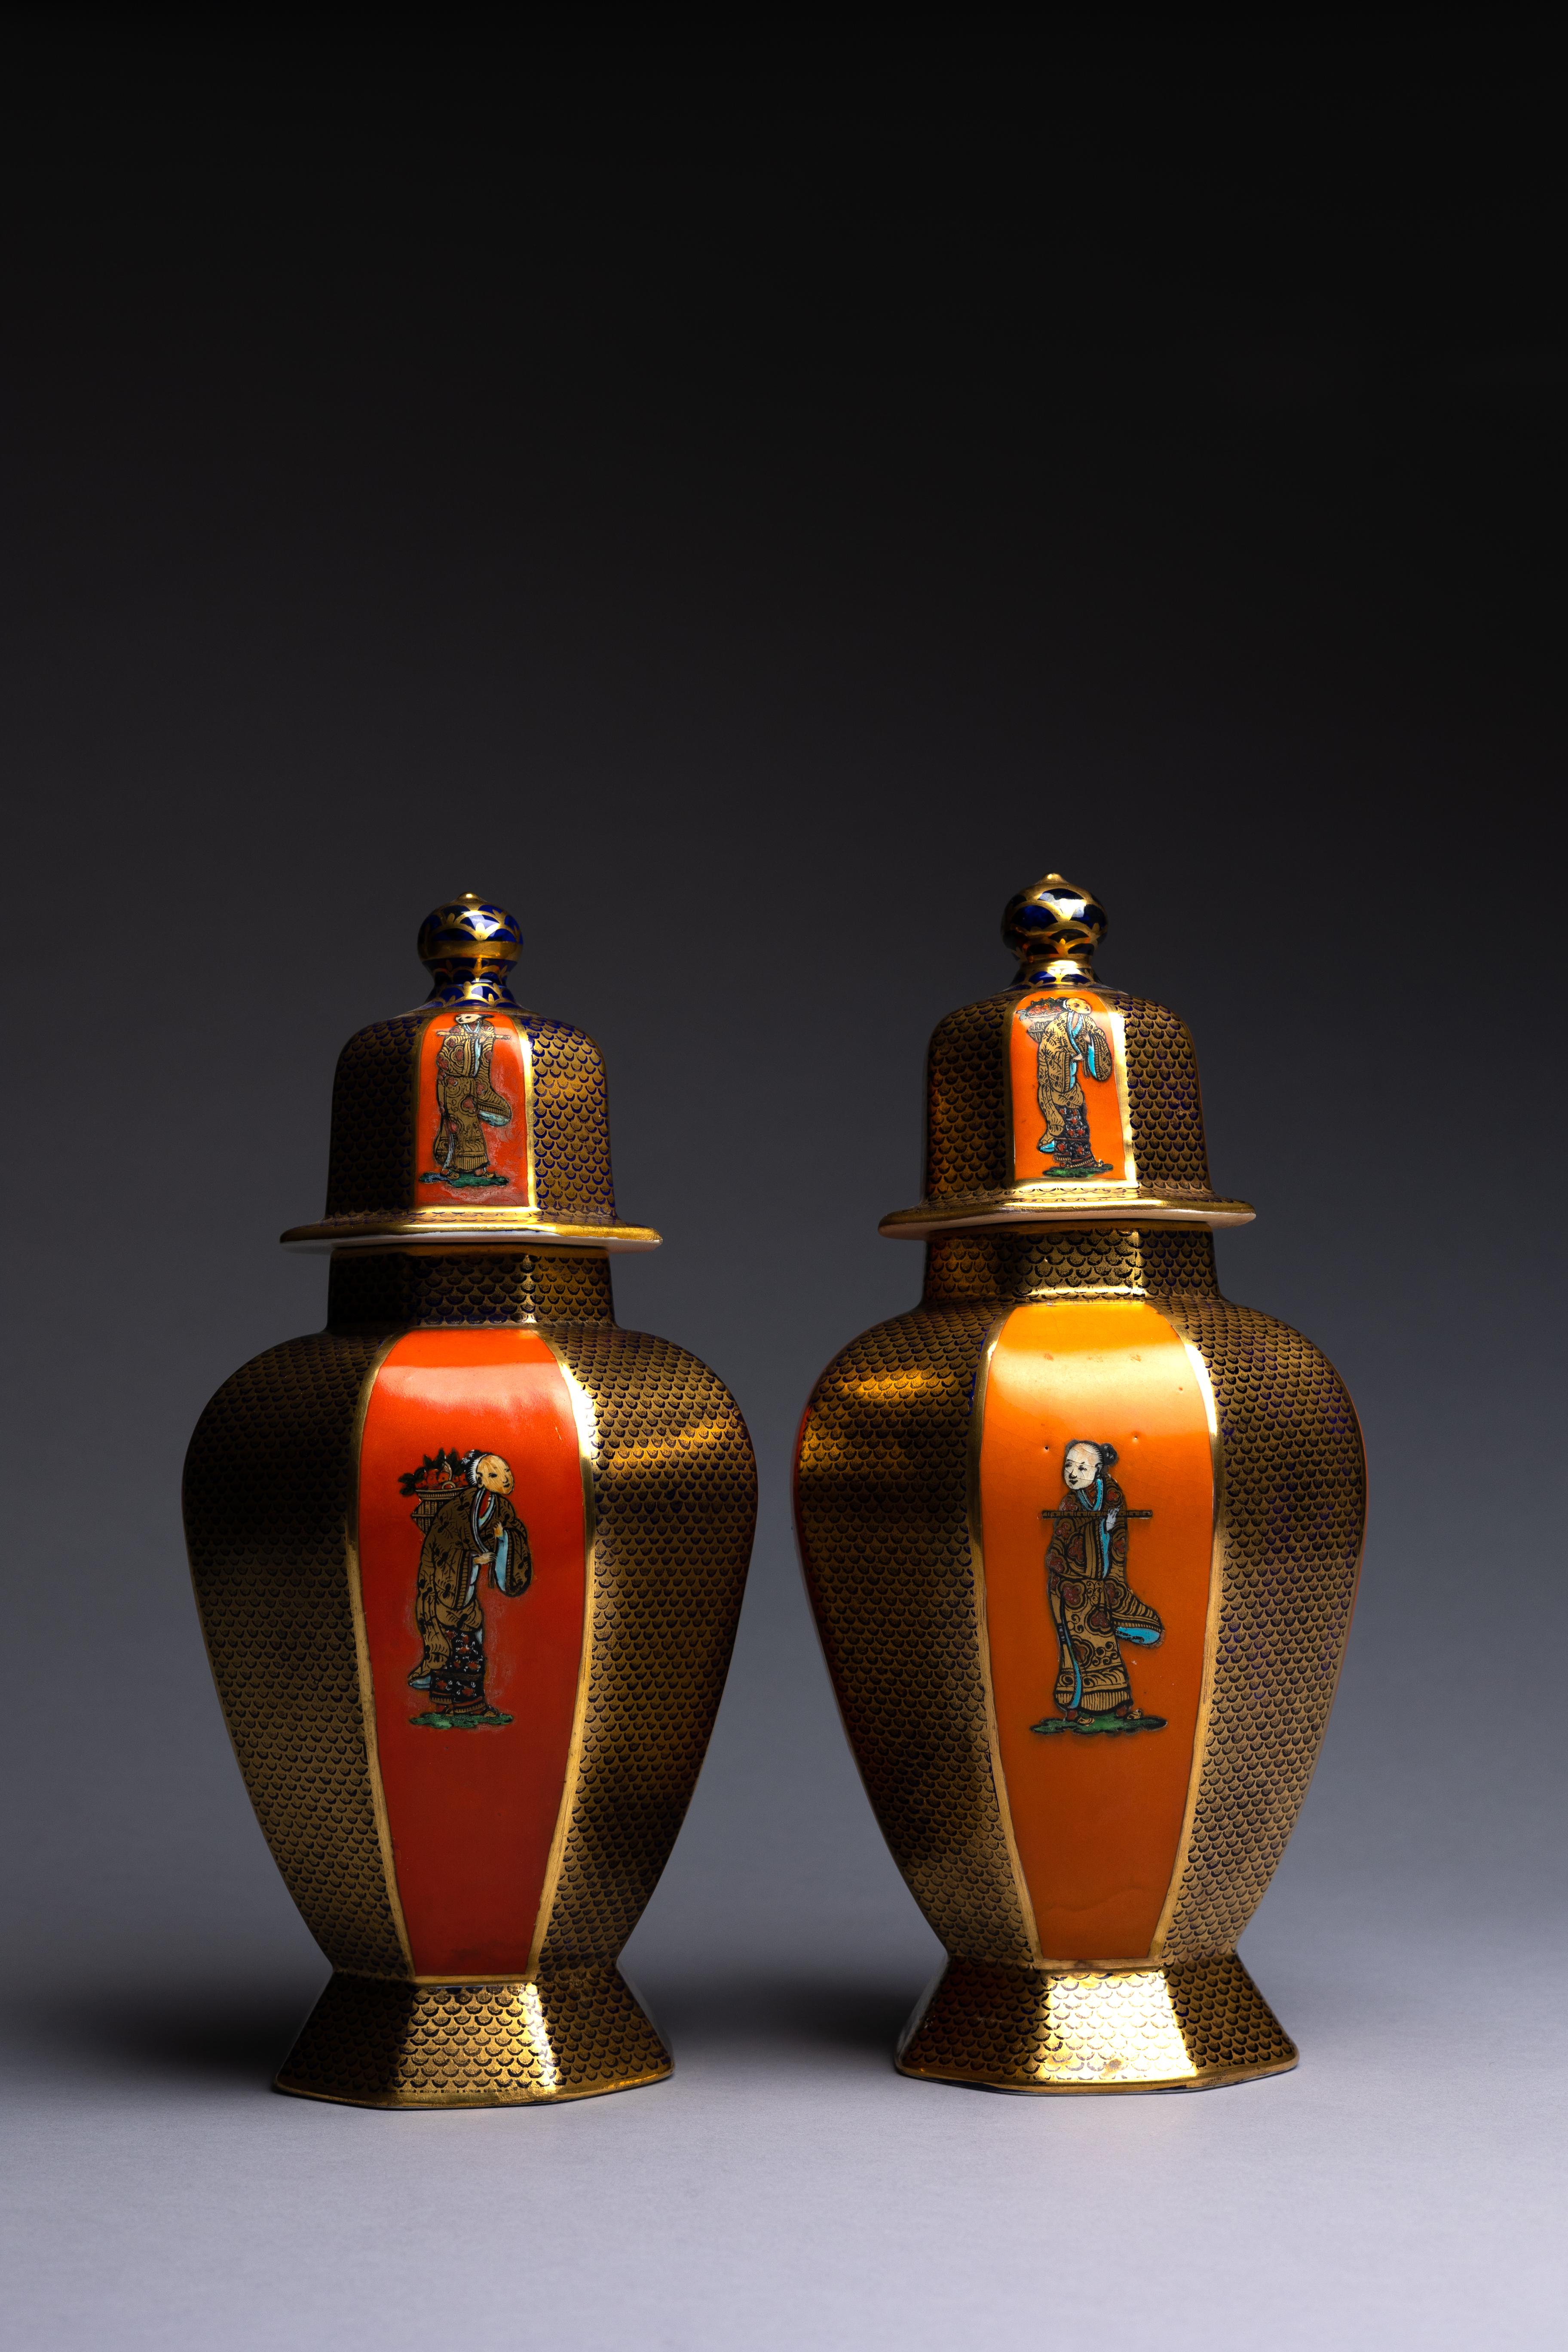 A 5-piece garniture of Mason's Ashworth ironstone vessels in orange, chinoiserie patterns. This garniture makes a striking statement with a bright orange glaze underneath cobalt, turquoise, and gold details.

The garniture comprises:
-A pair of